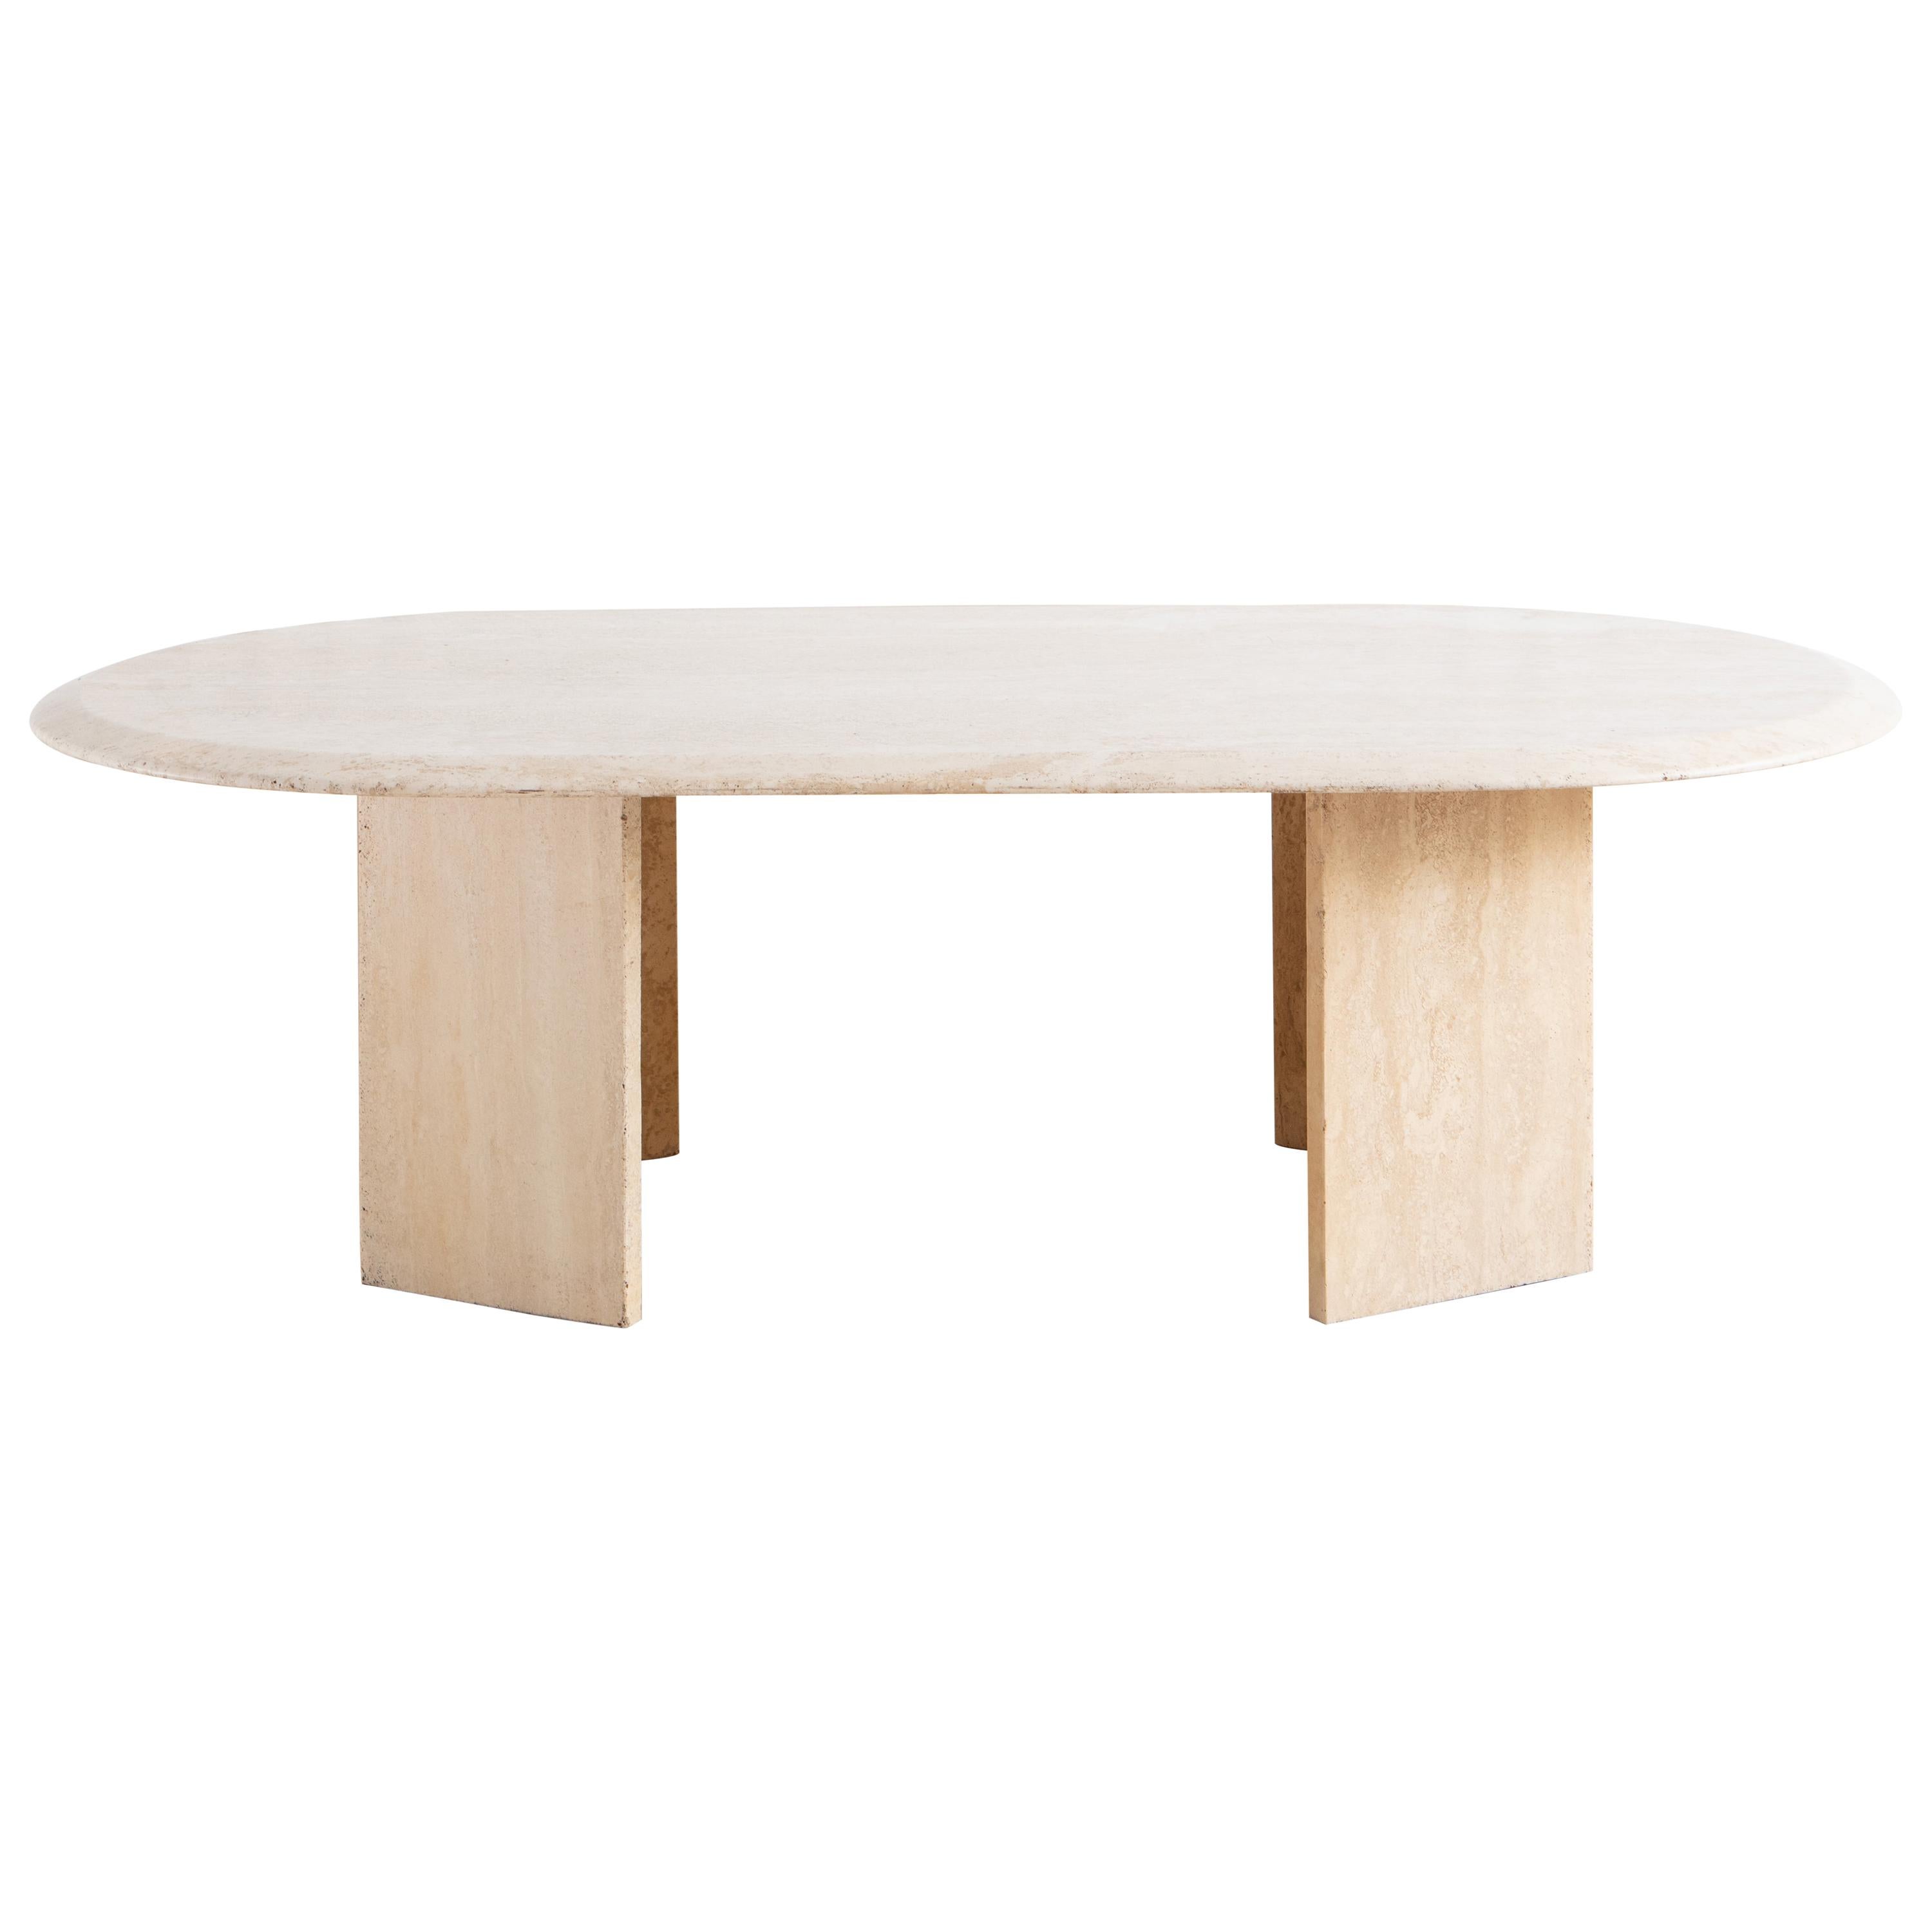 Oval Travertine Coffee Table with Angled Base